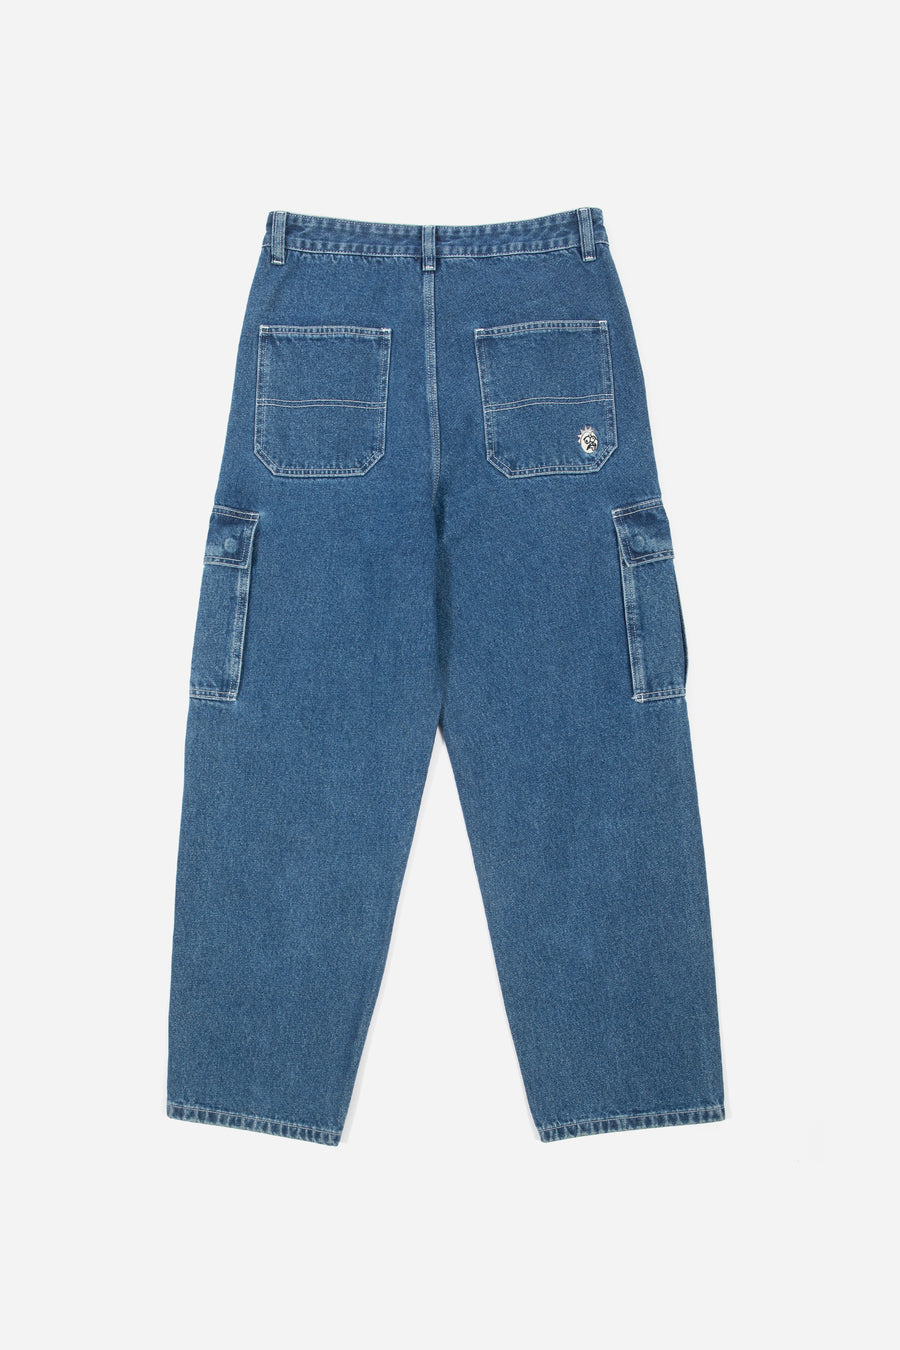 Wasted Creager Denim Pant